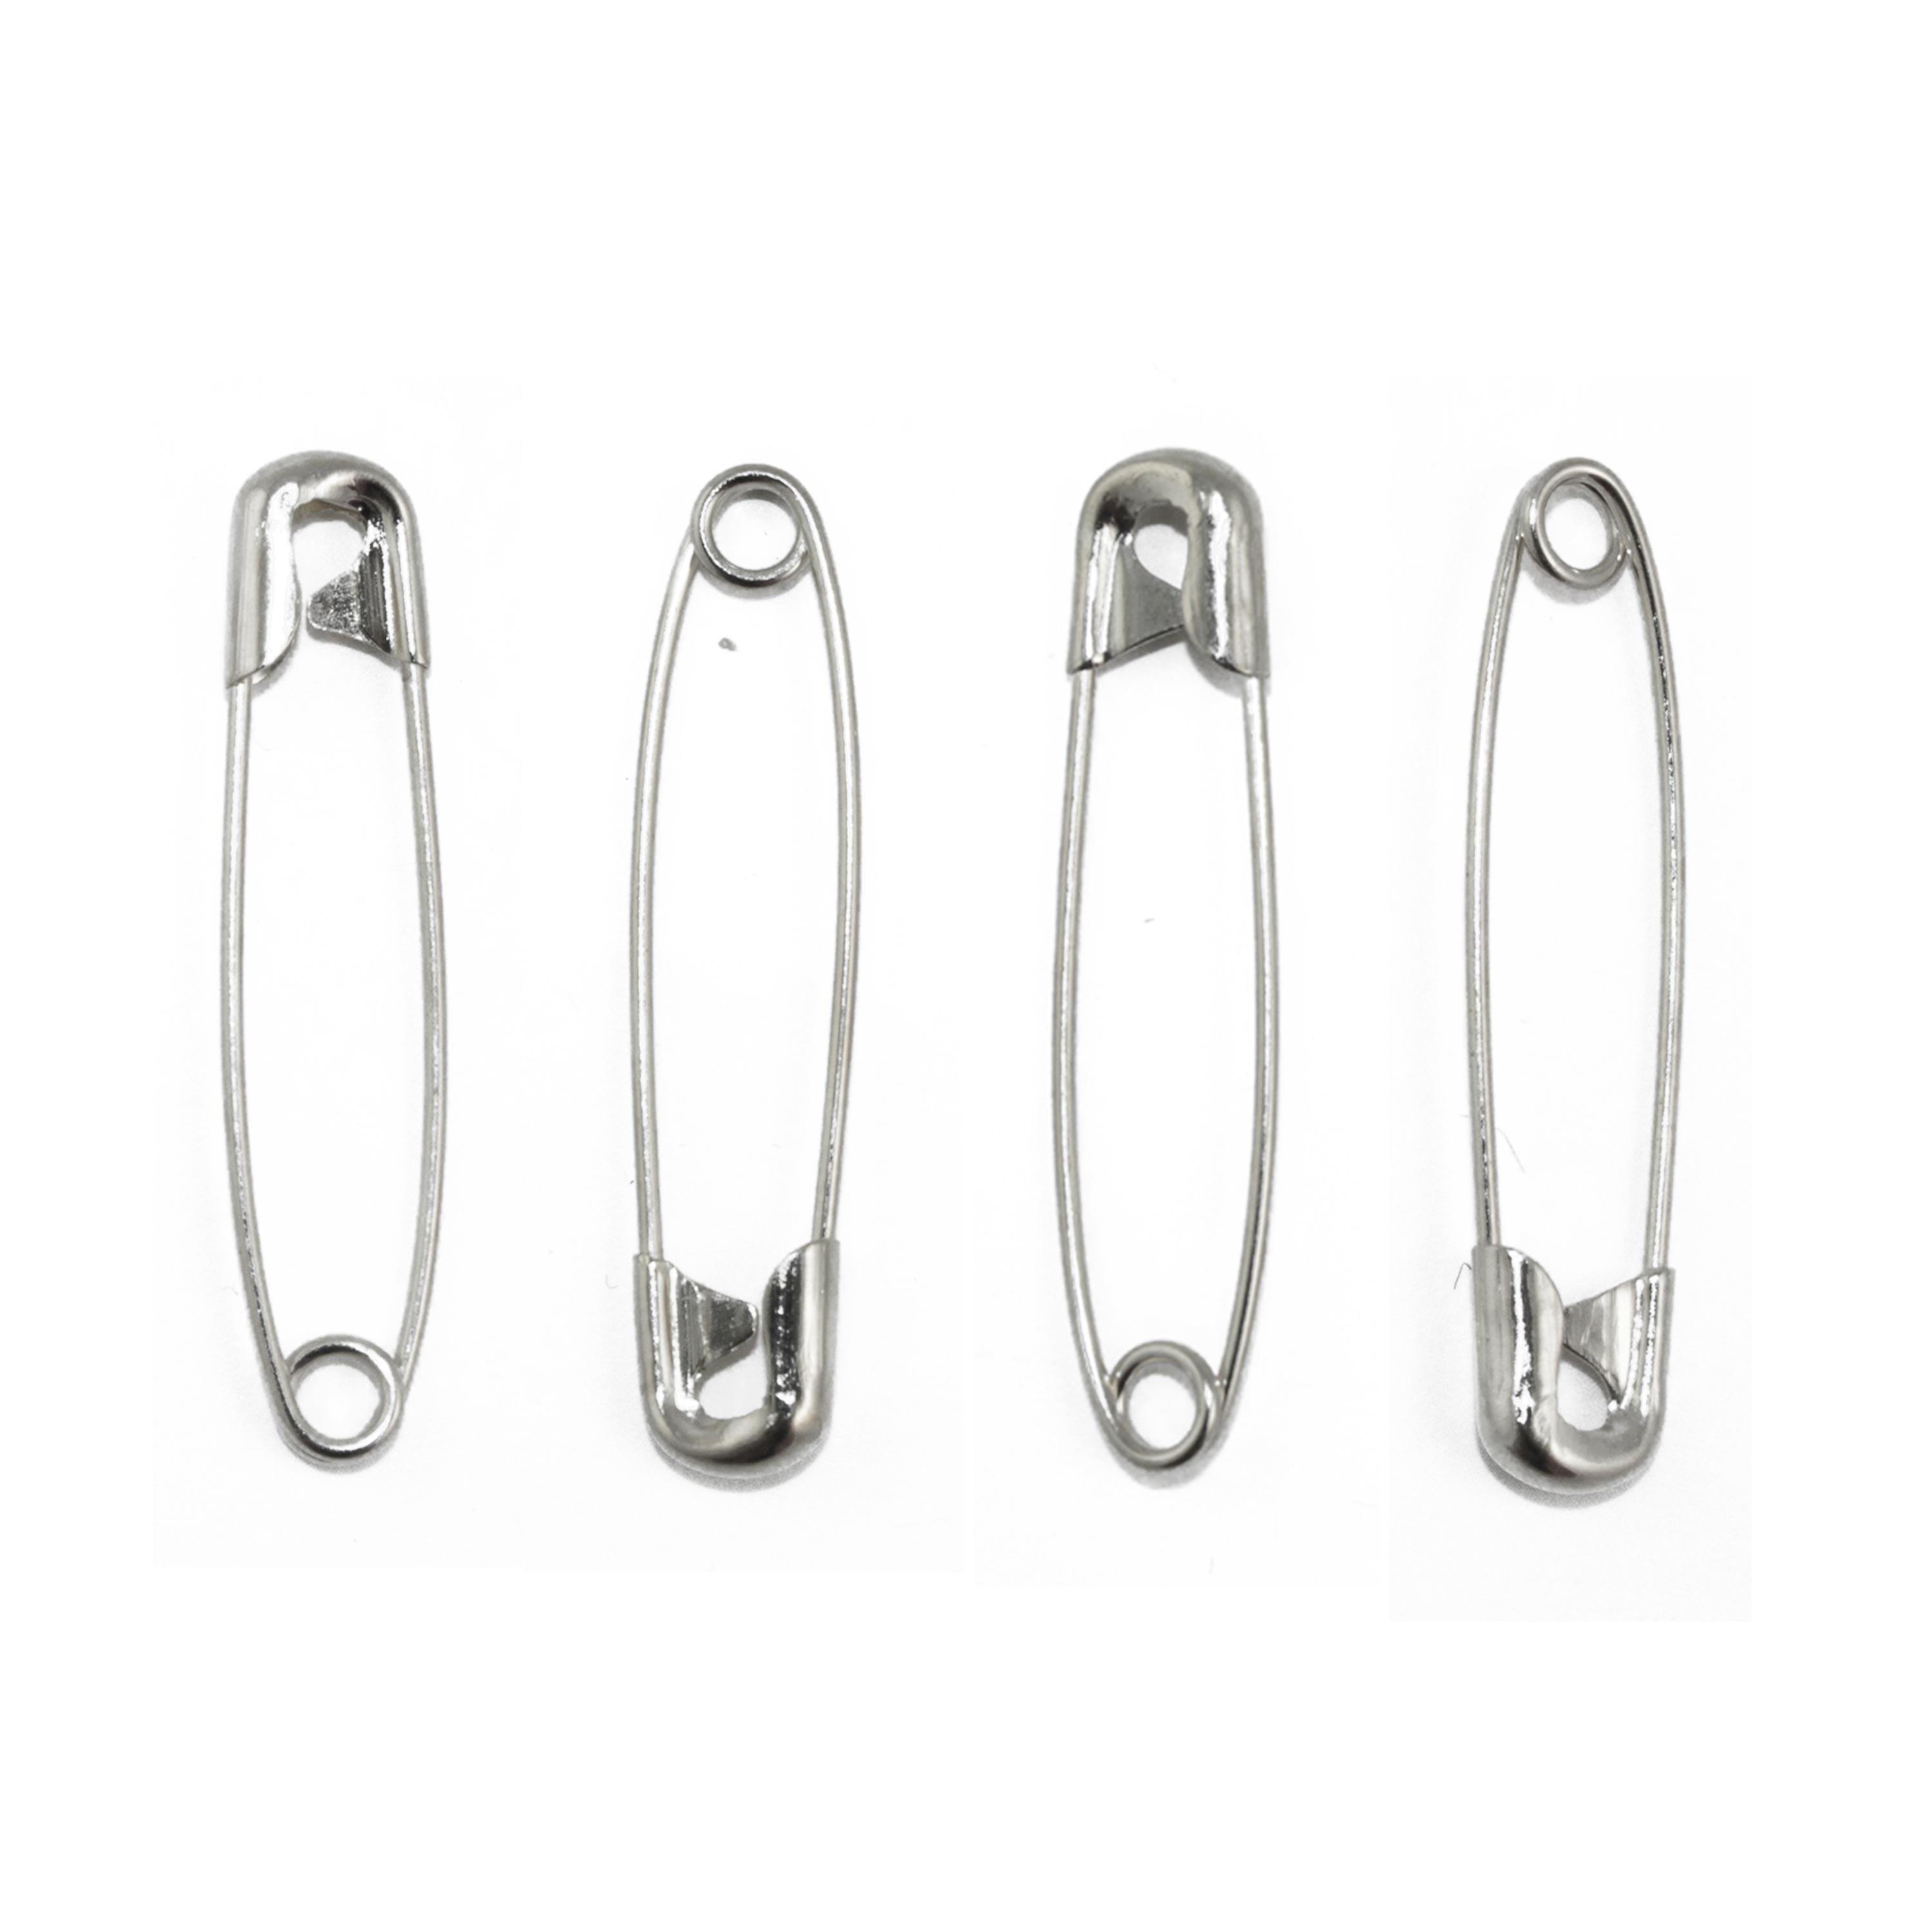 Bastex 6 Pack of 5 Inch Safety Pins. Extra Large Heavy Duty Stainless Steel  Pin for Laundry, Upholstery, Horse Blanket, Quilting, Decorative Fashion